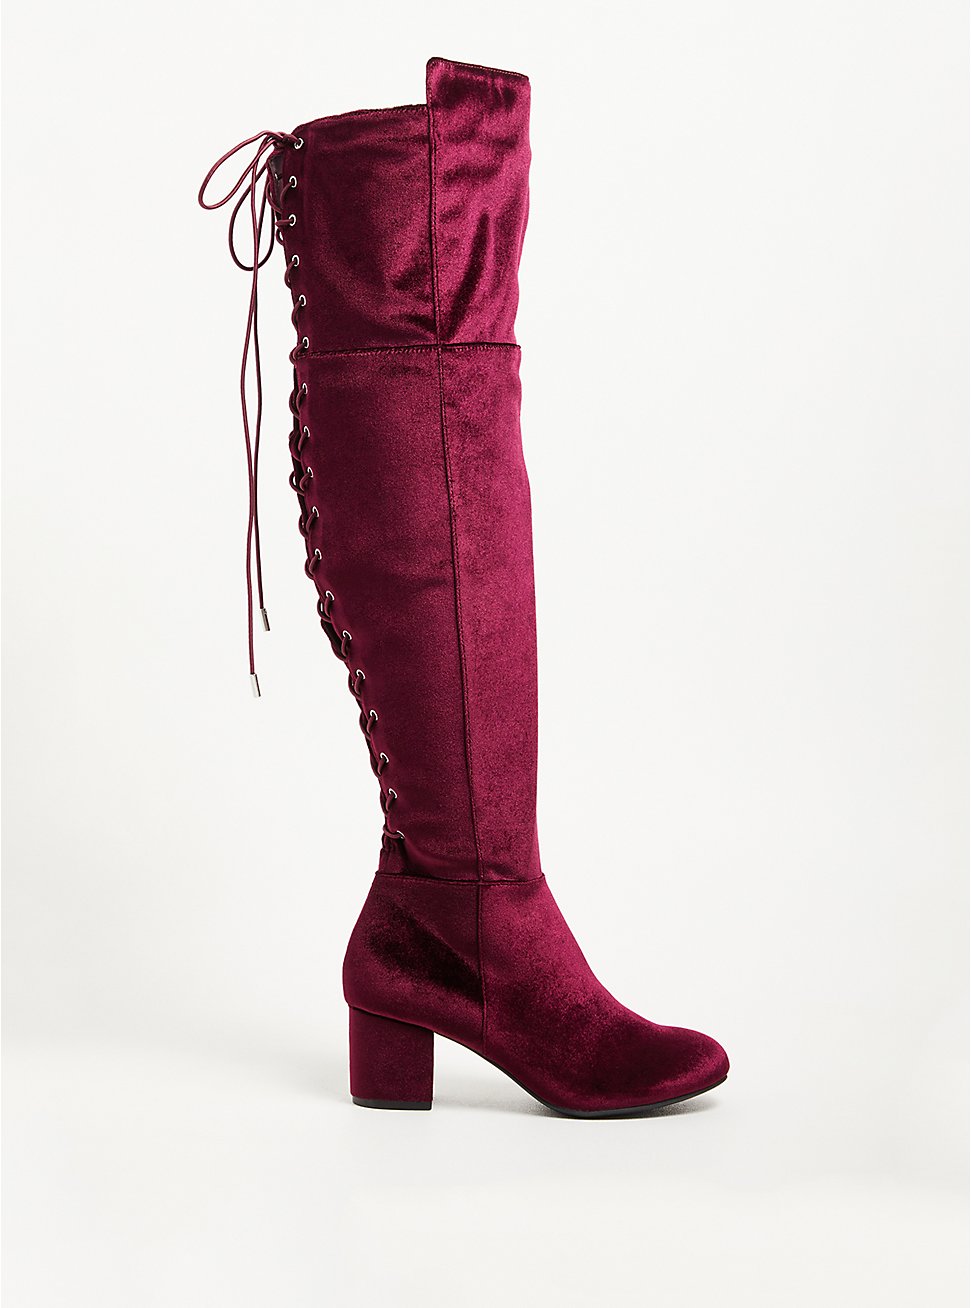 Lace-Up Over The Knee Boot (WW), BURGUNDY, hi-res